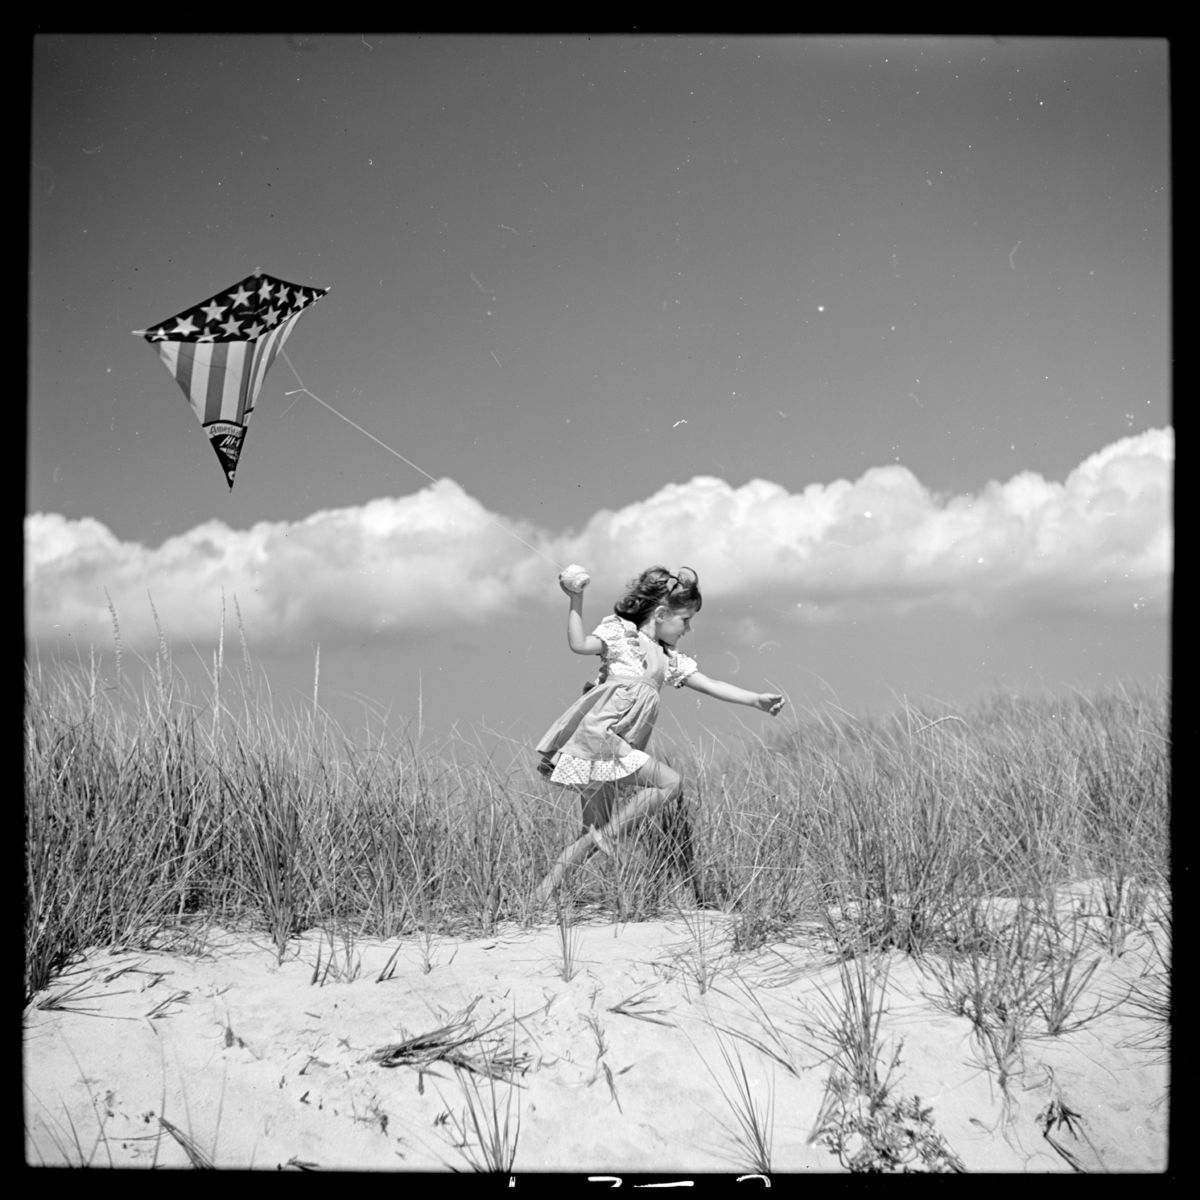 Photograph shows Toni Frissell's daughter, Sidney Bacon (Frissell) Stafford, running on a beach with a kite in Southampton, Long Island, New York in 1944 - by Toni Frissell.